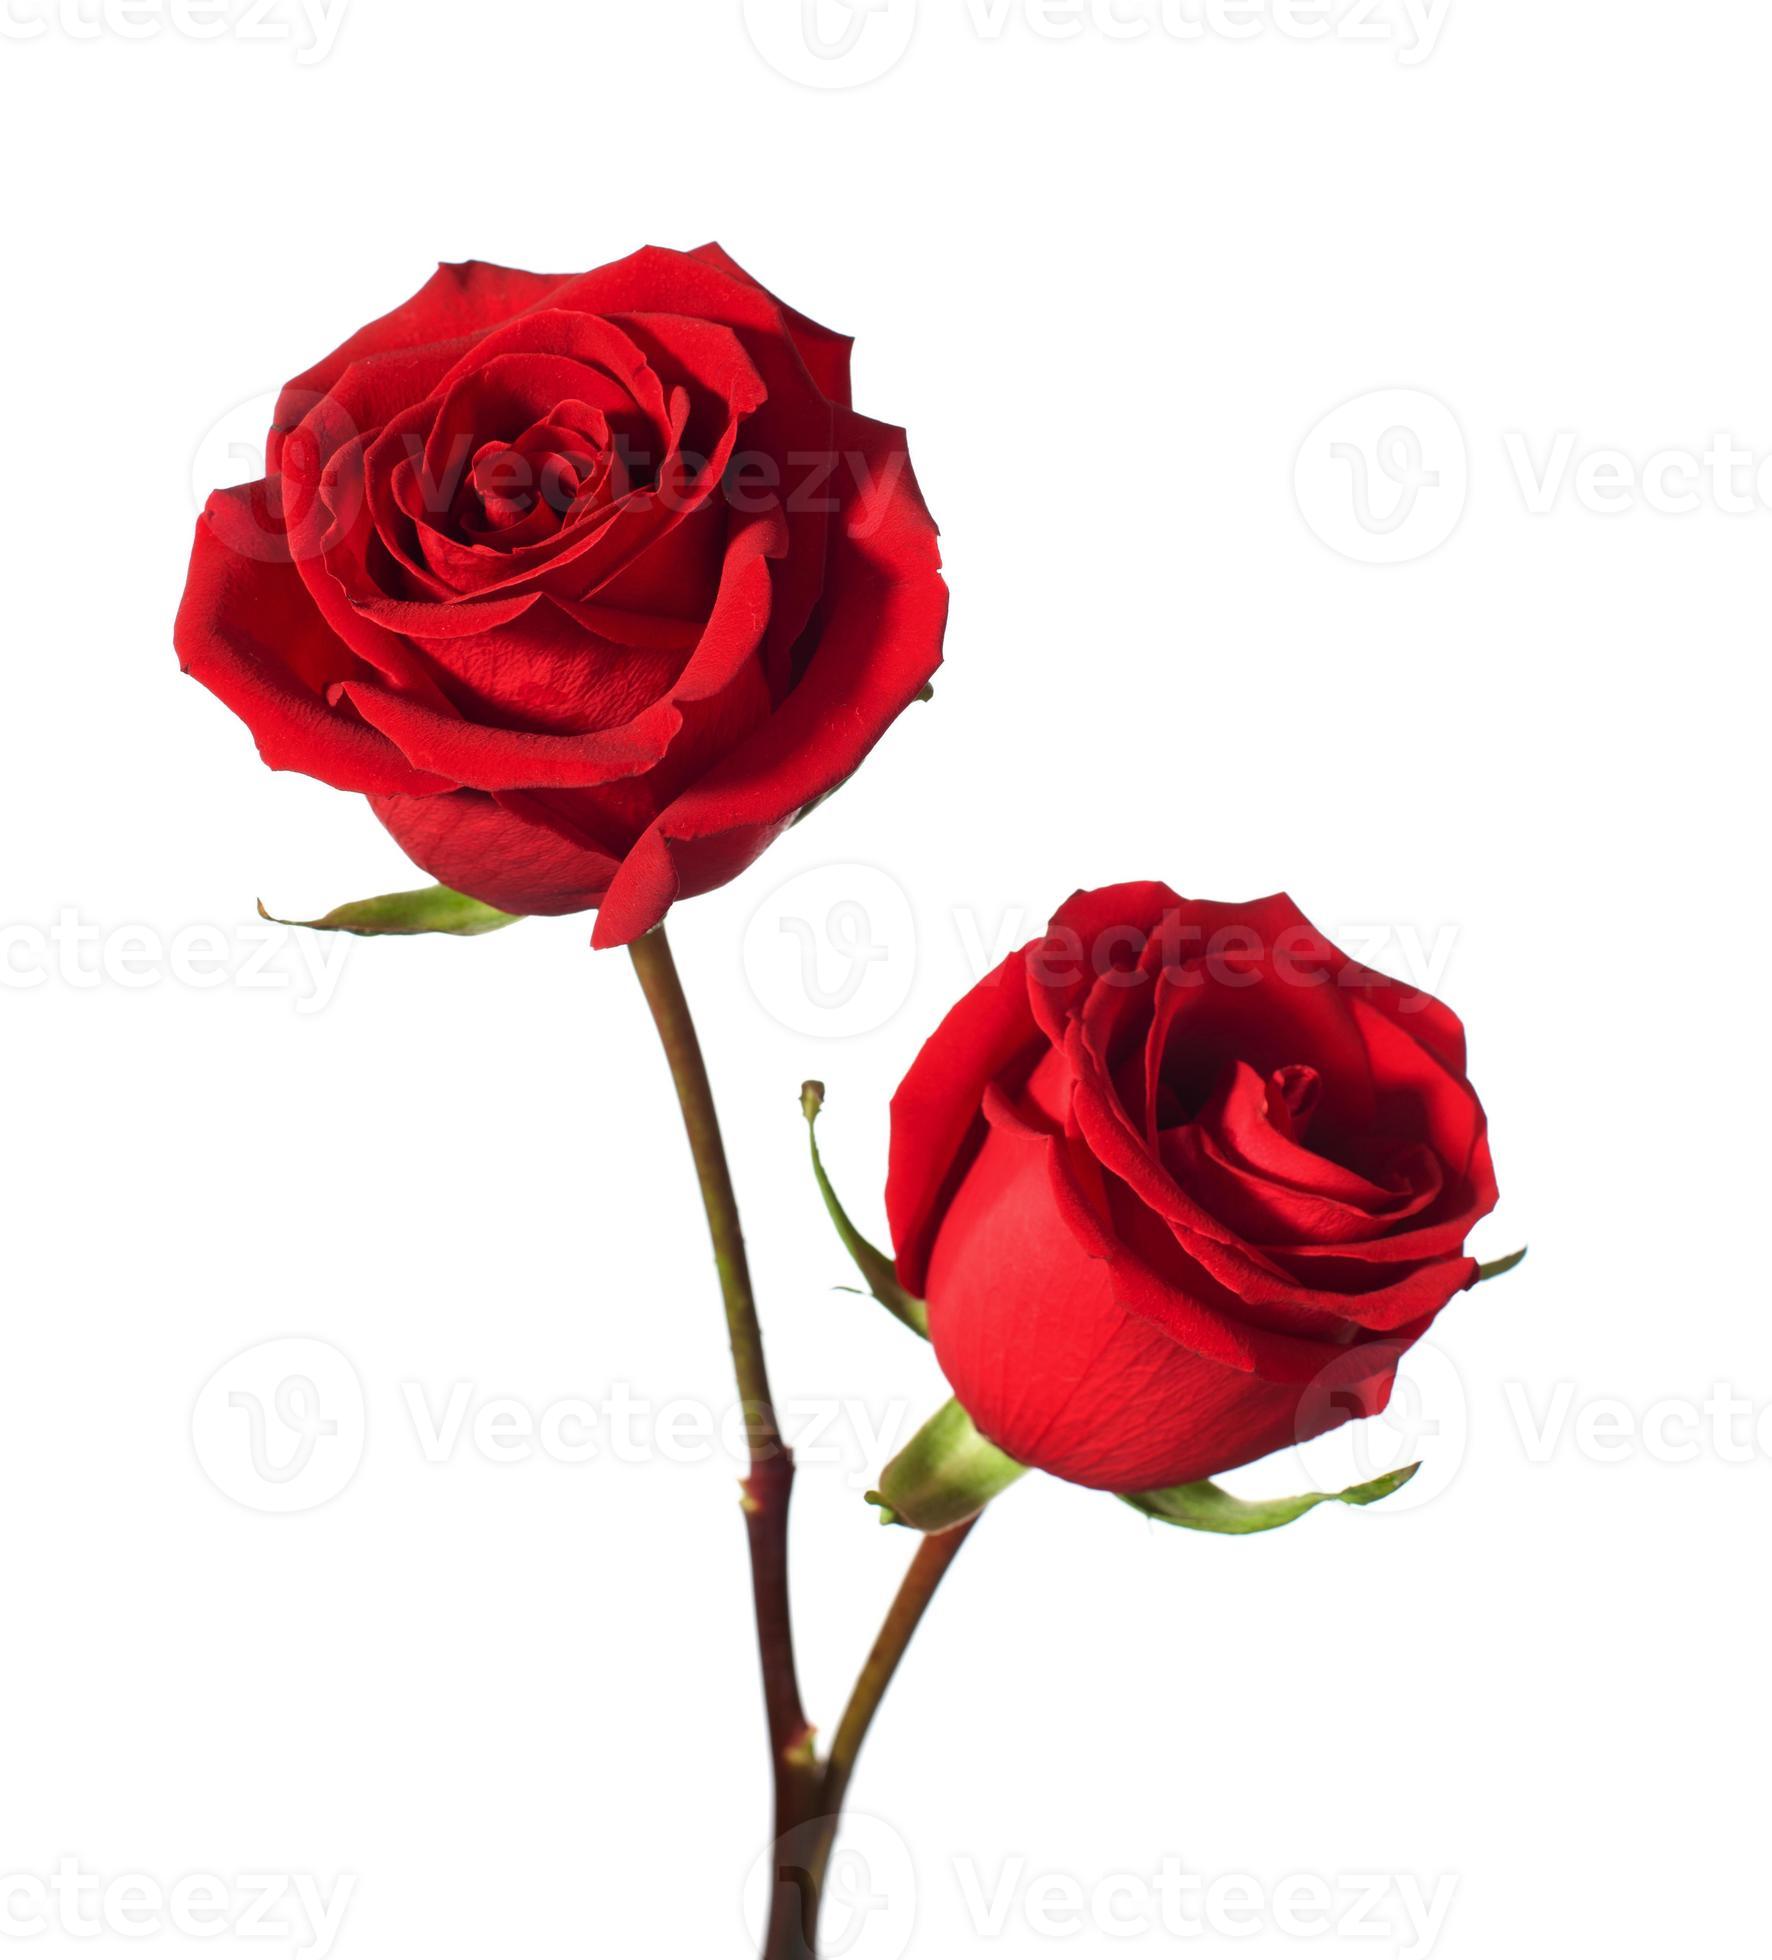 Two Red Rose Isolated On White 854988